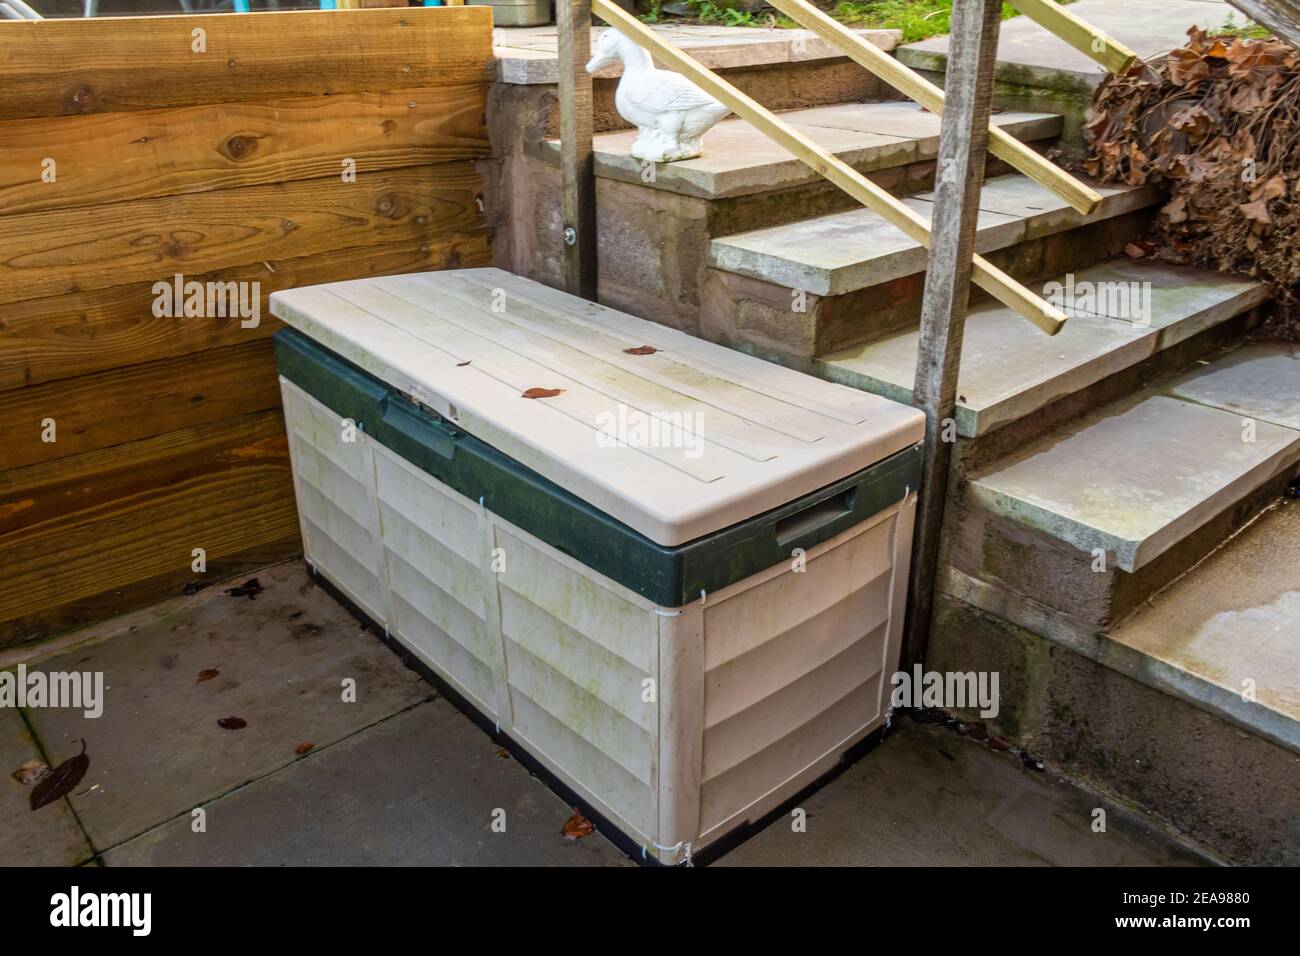 A plastic garden log box beside some steps in a landscaped garden Stock Photo